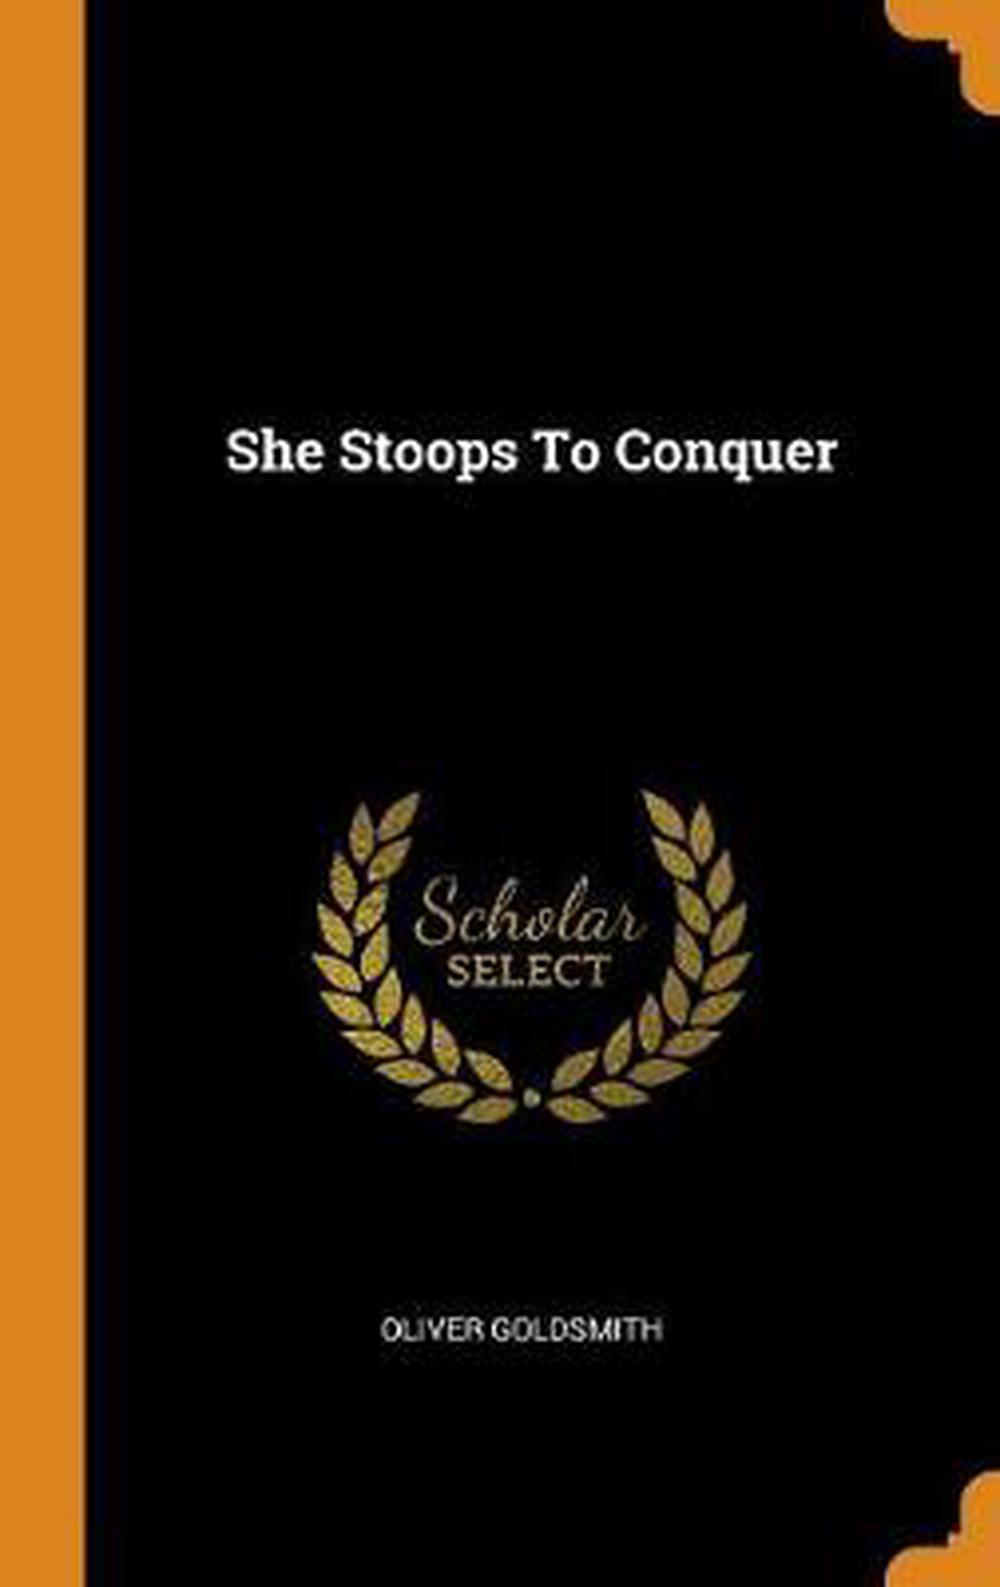 she stoops to conquer by oliver goldsmith